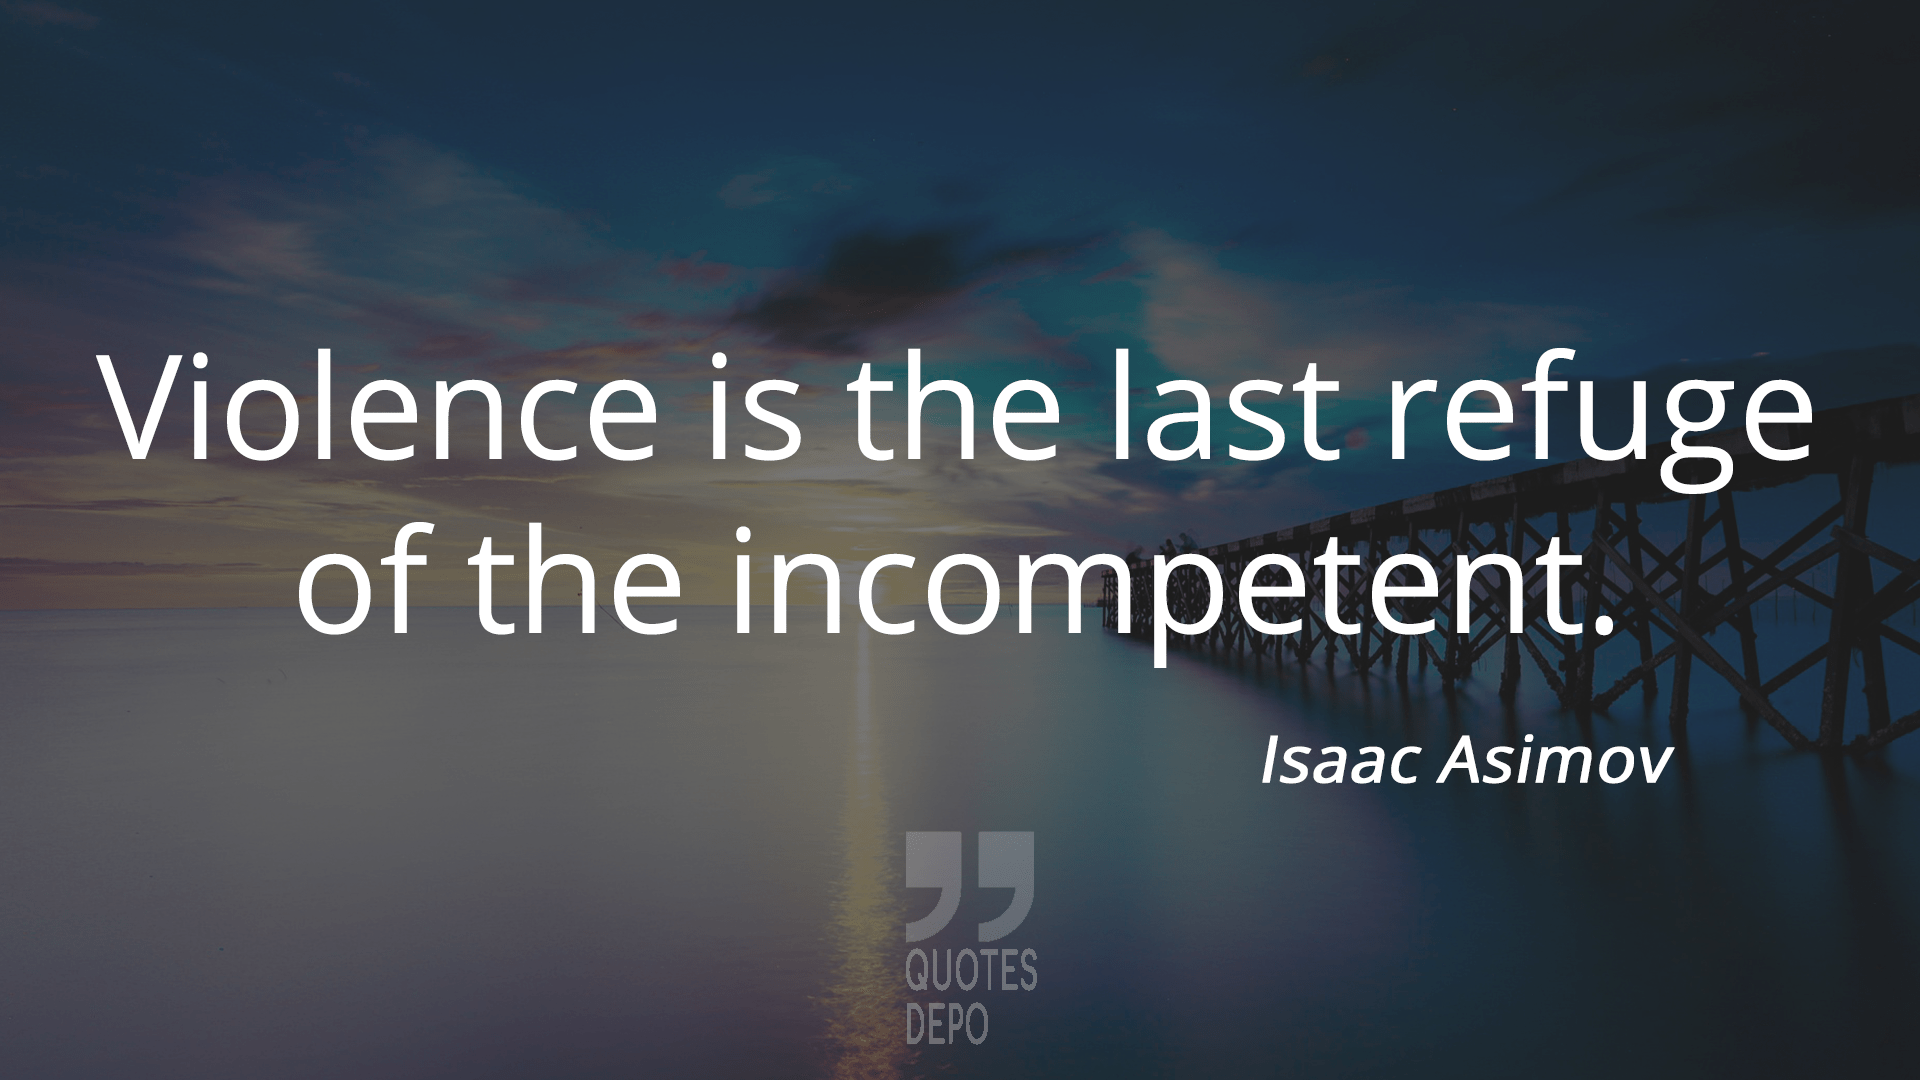 violence is the last refuge of the incompetent - isaac asimov quotes